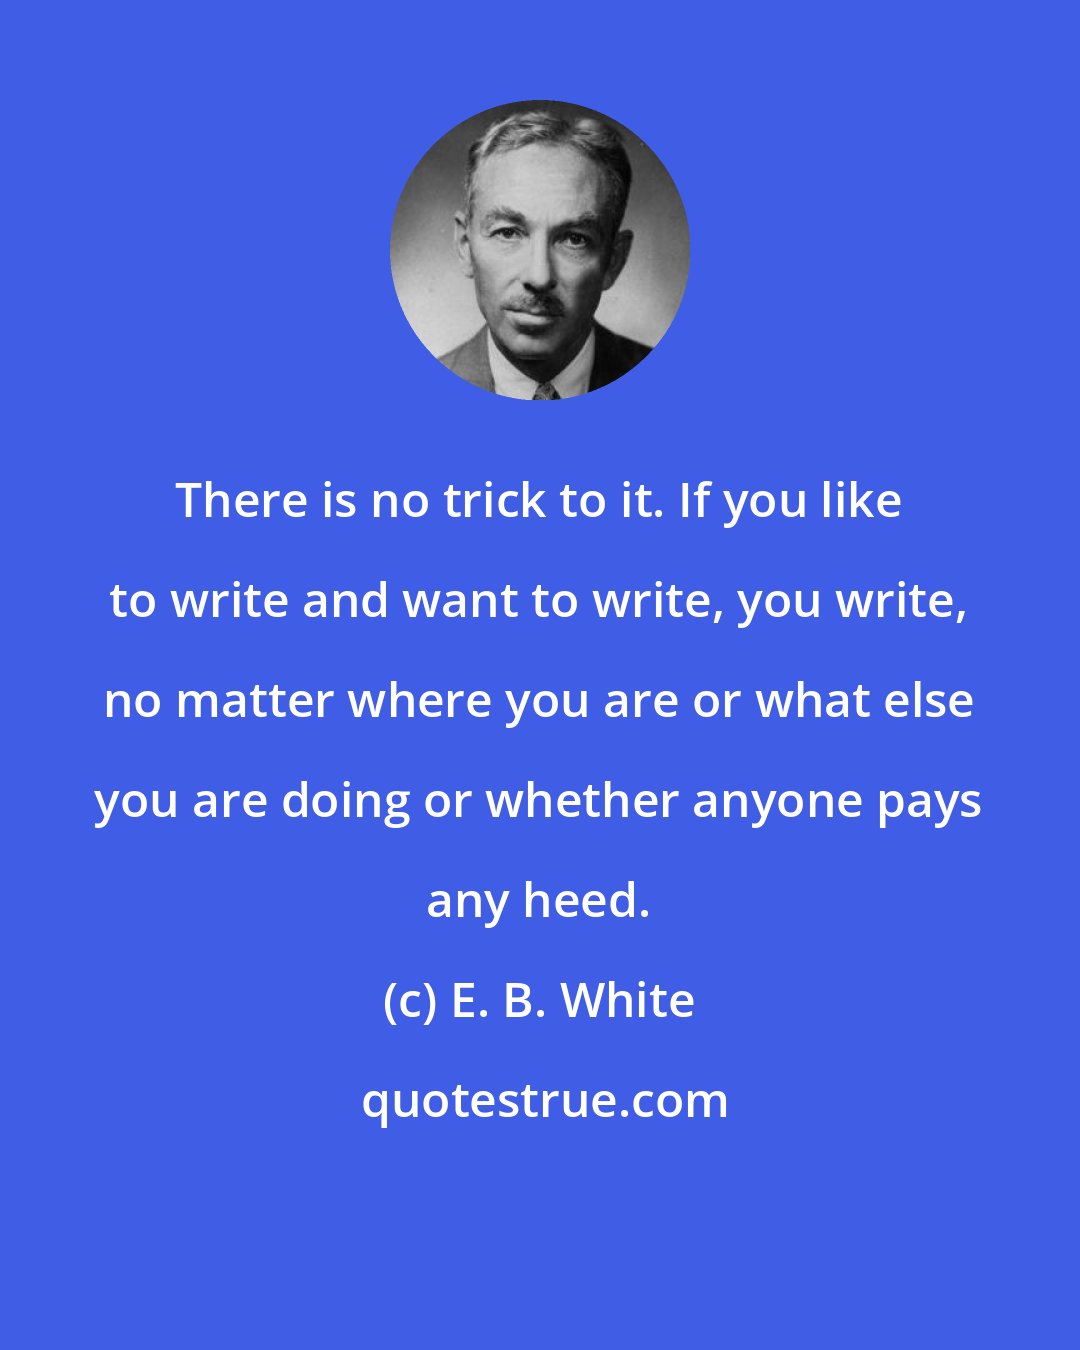 E. B. White: There is no trick to it. If you like to write and want to write, you write, no matter where you are or what else you are doing or whether anyone pays any heed.